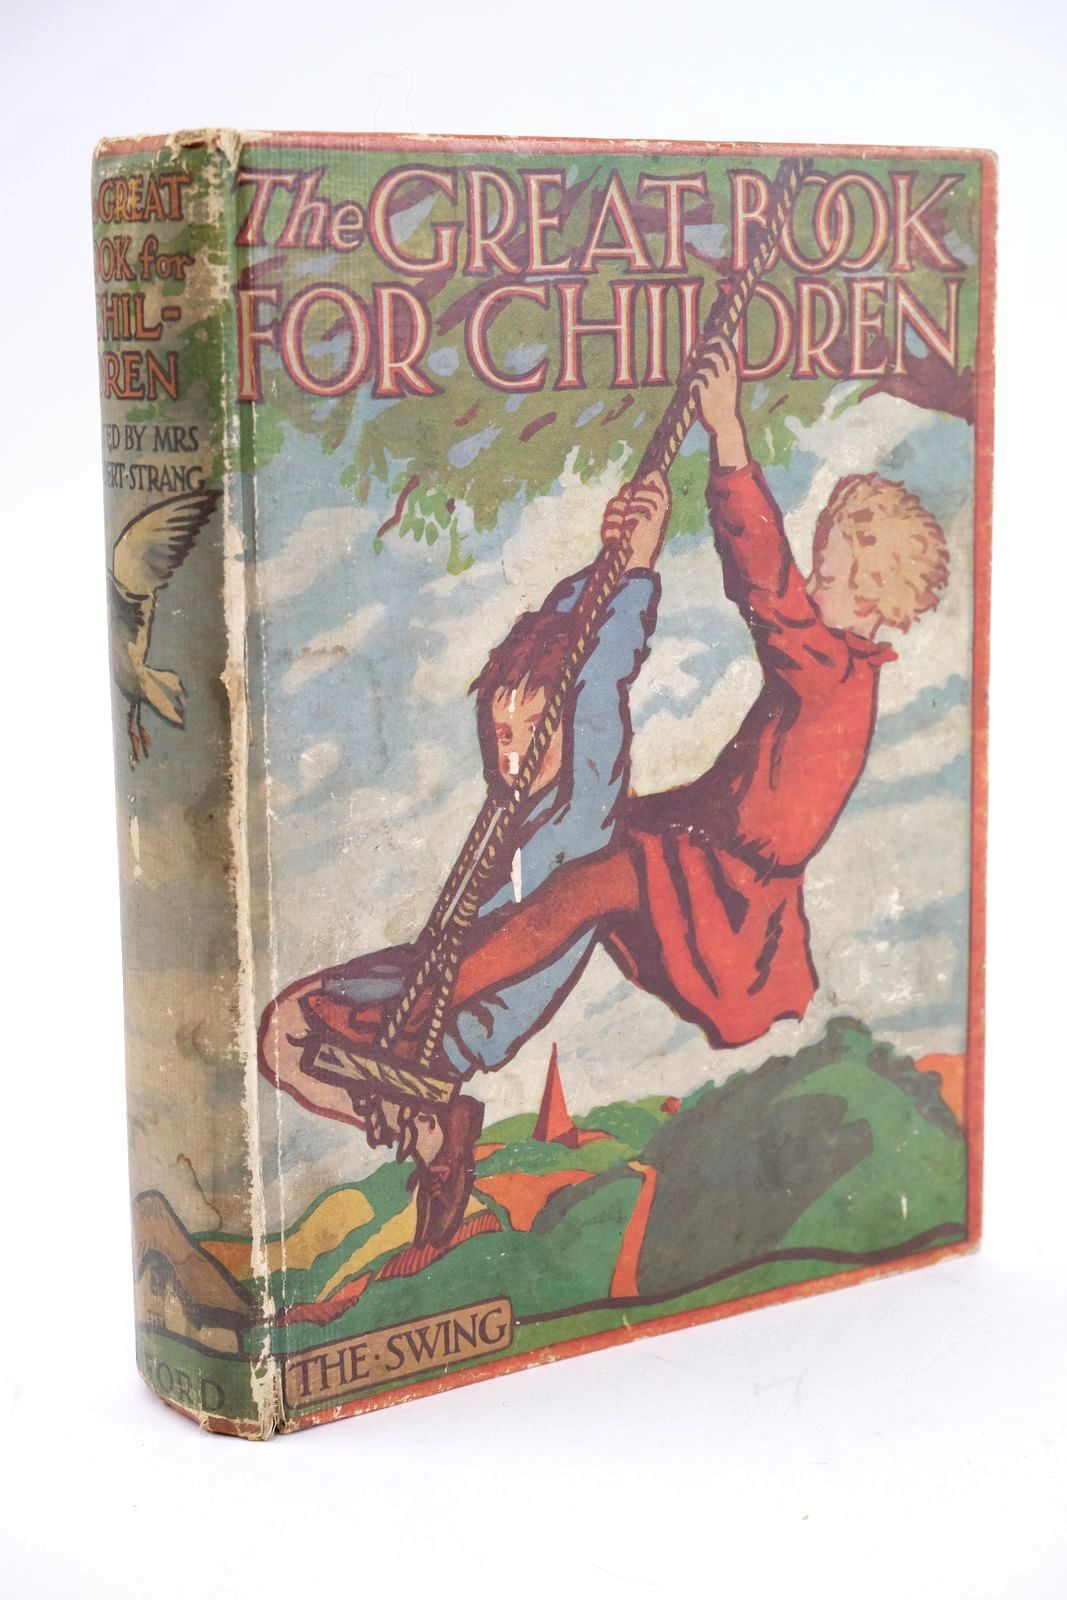 Photo of THE GREAT BOOK FOR CHILDREN written by Strang, Mrs. Herbert et al, illustrated by Rees, E. Dorothy Anderson, Anne et al., published by Oxford University Press, Humphrey Milford (STOCK CODE: 1324755)  for sale by Stella & Rose's Books